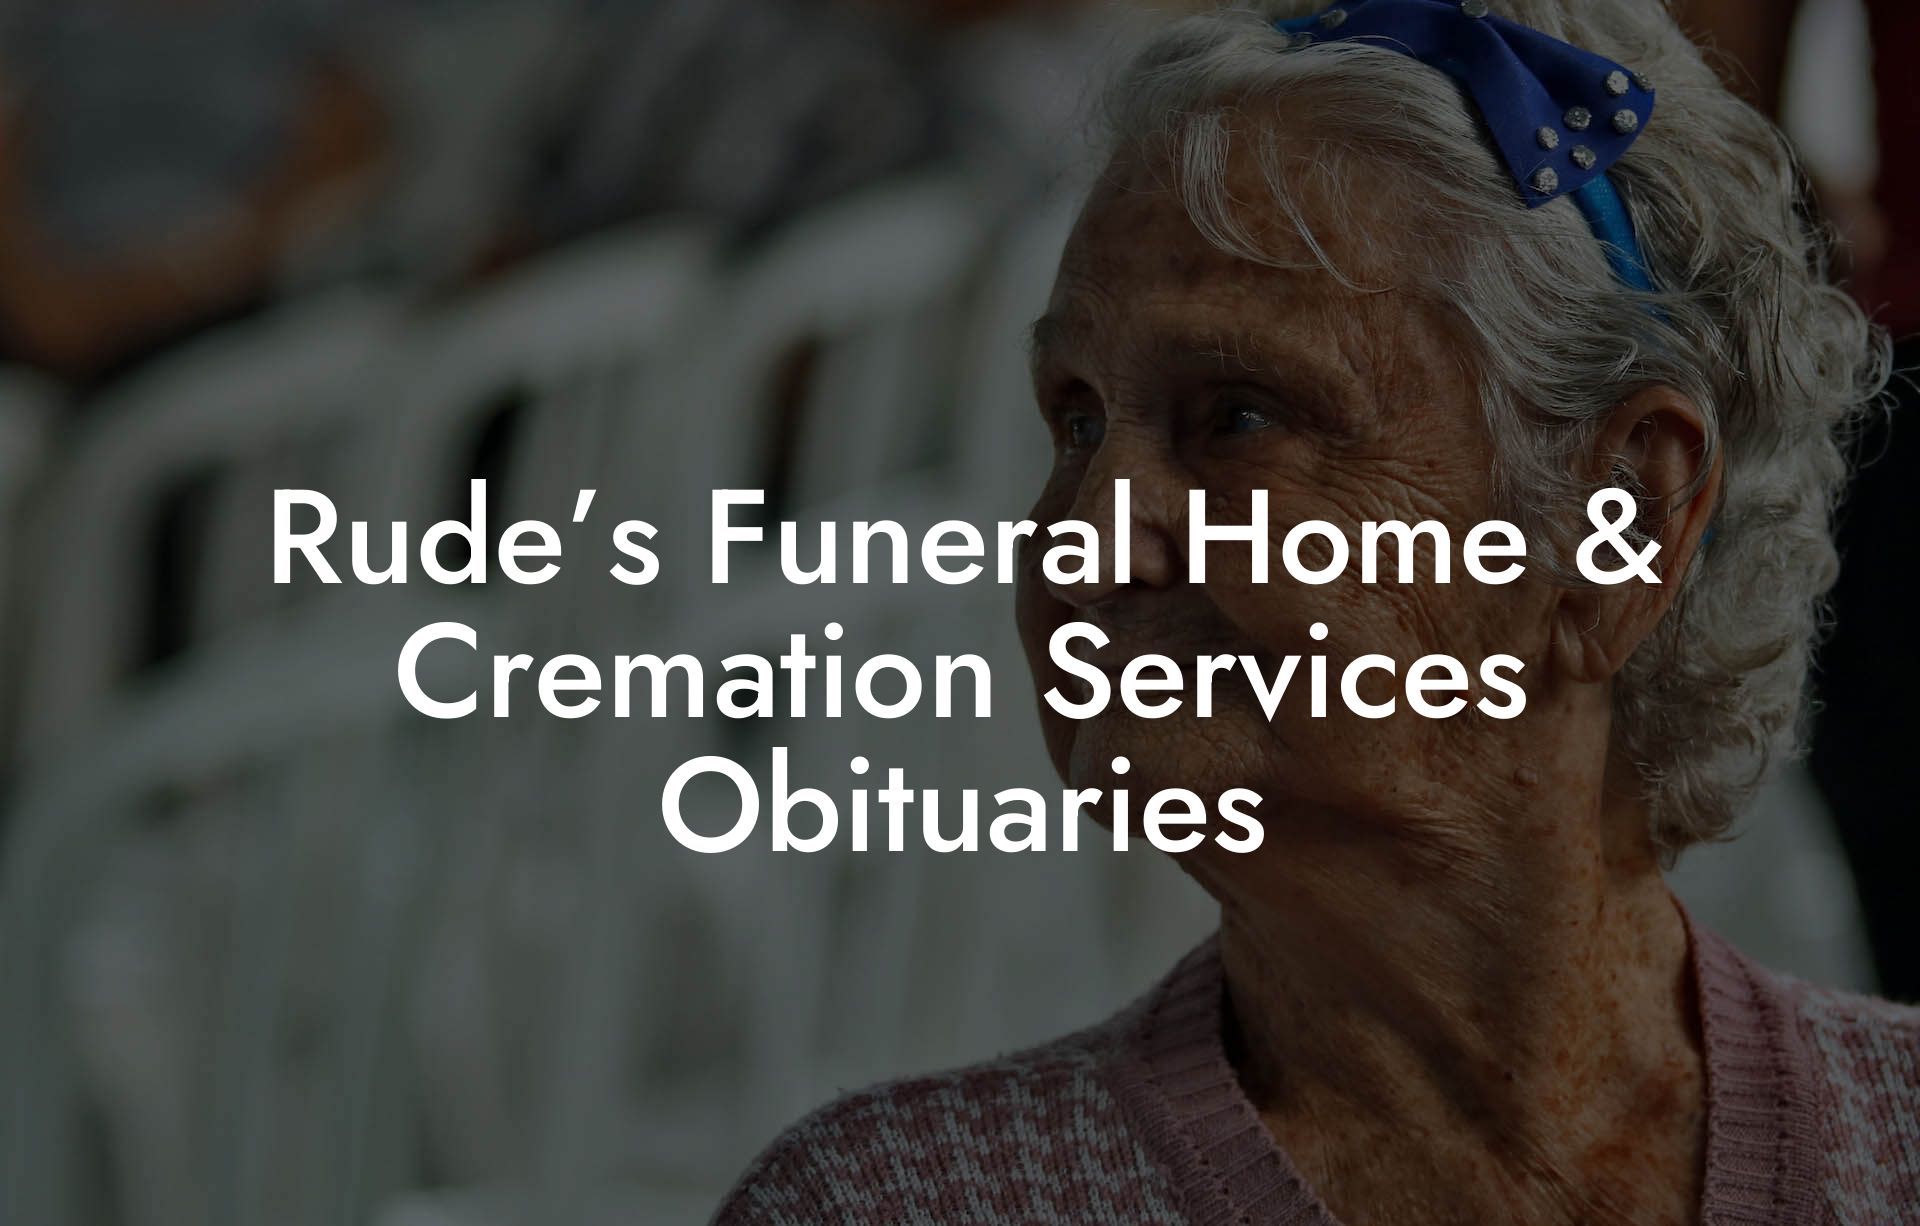 Rude’s Funeral Home & Cremation Services Obituaries